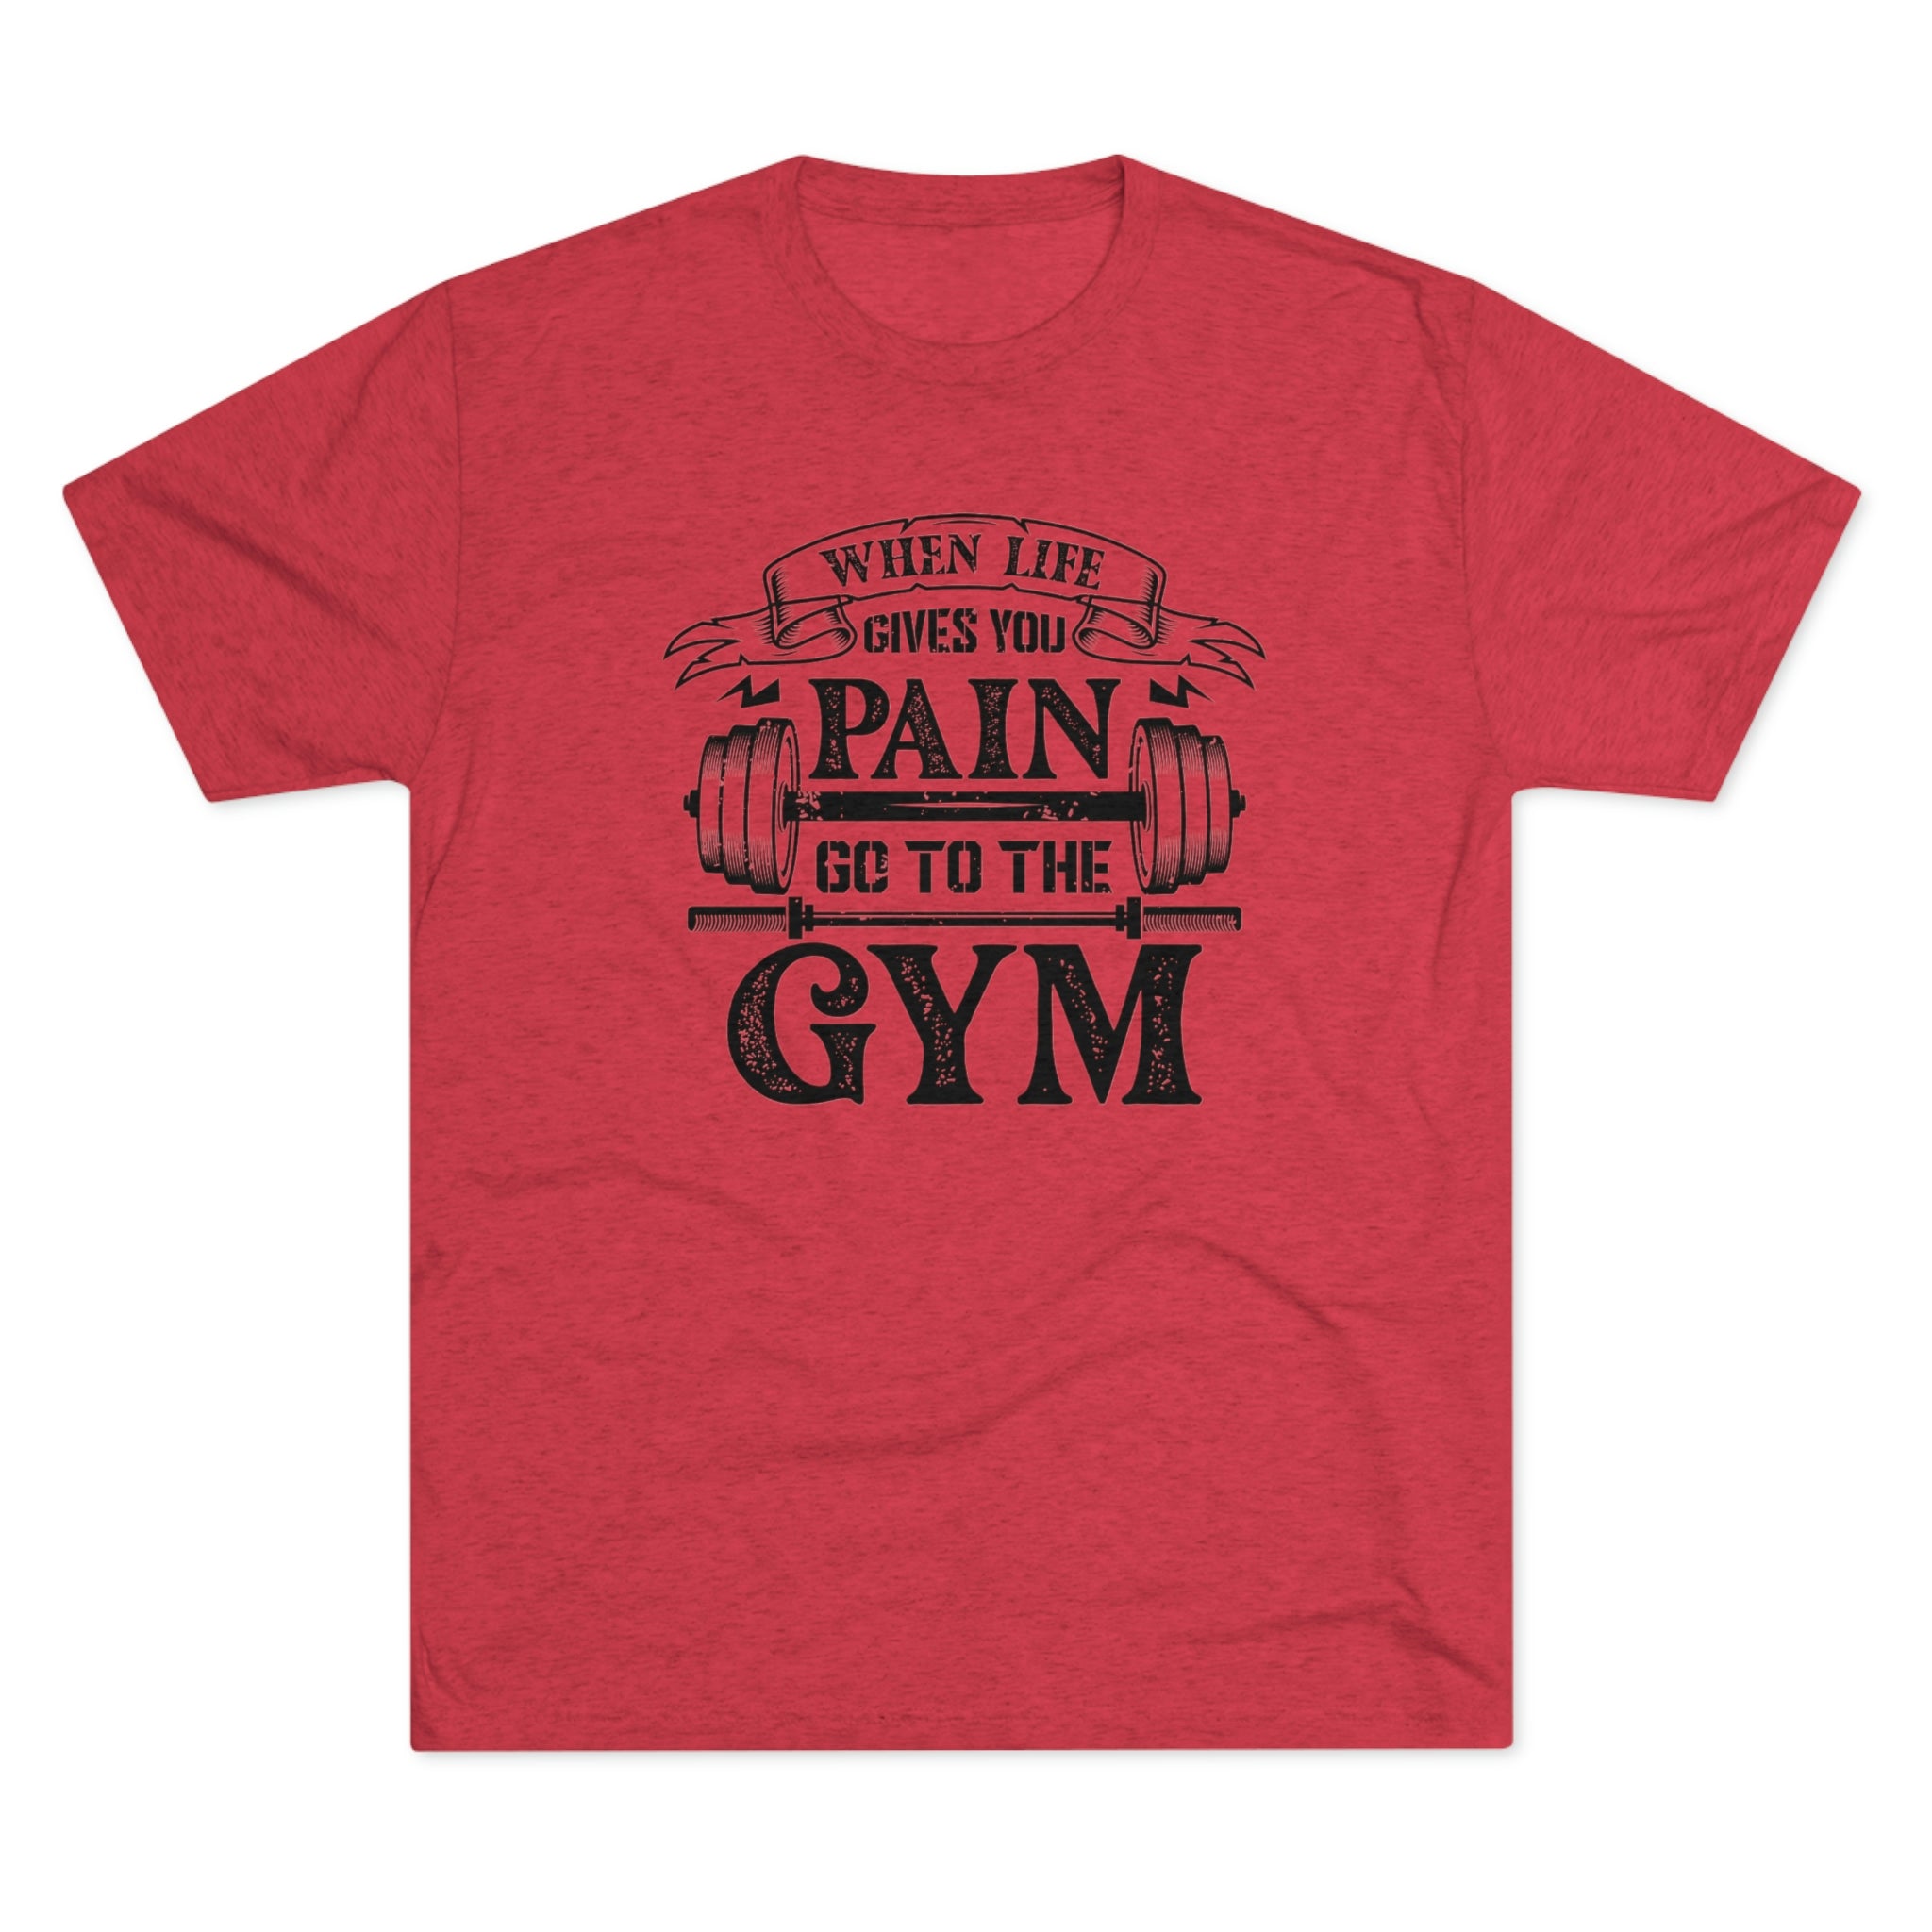 When Life Gives You Pain Go to the Gym